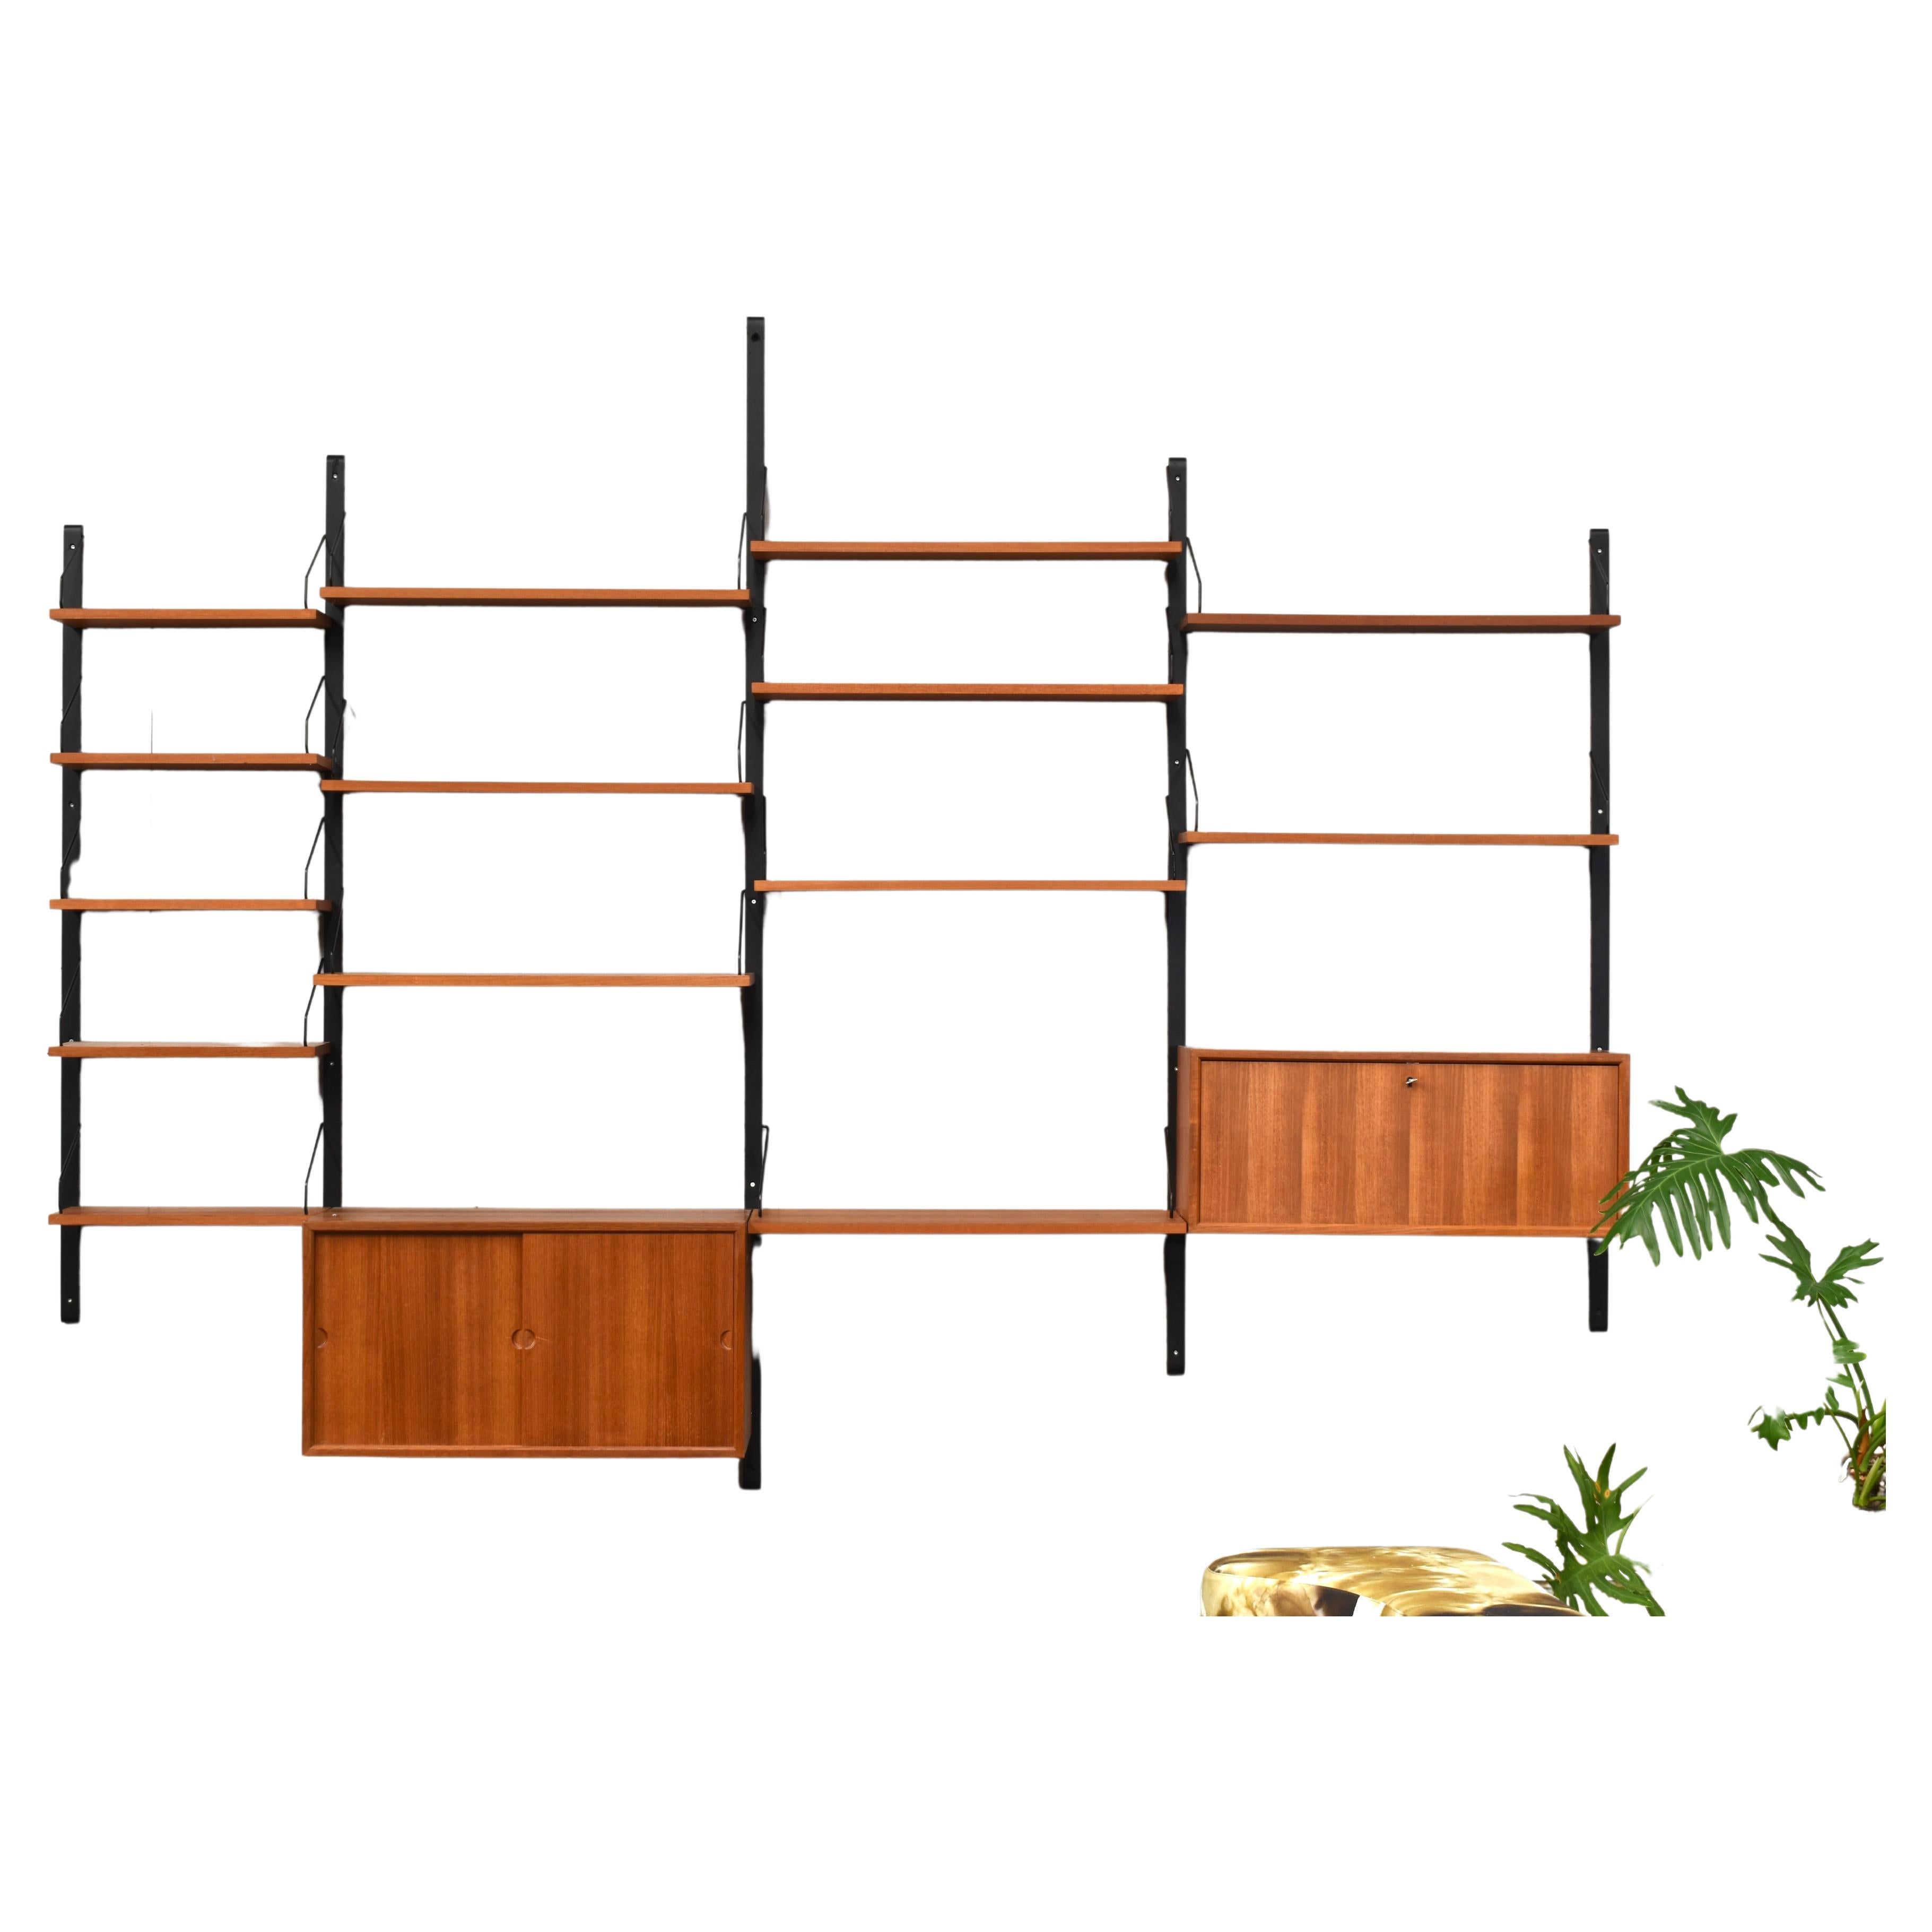 Teak modular wall unit by Pool Cadovius for CADO, Denmark - circa 1950-60. The wall unit still remains in very good condition after all these years with some minor signs of age and use. It features 2 cabinets, 8 normal width shelves, 5 rare to find